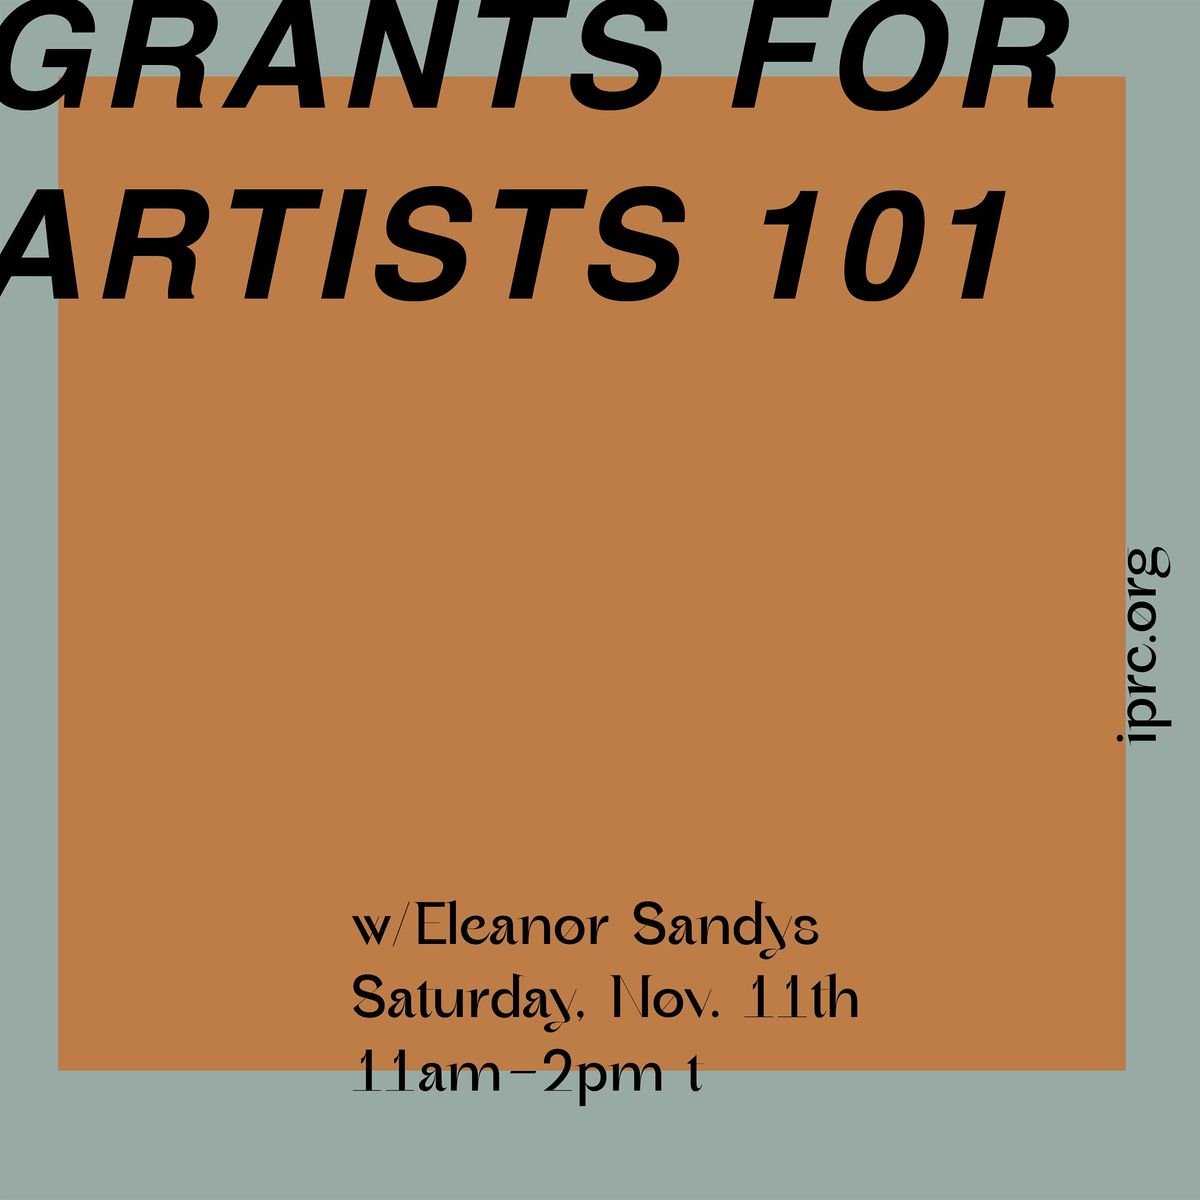 Grants for Artists 101